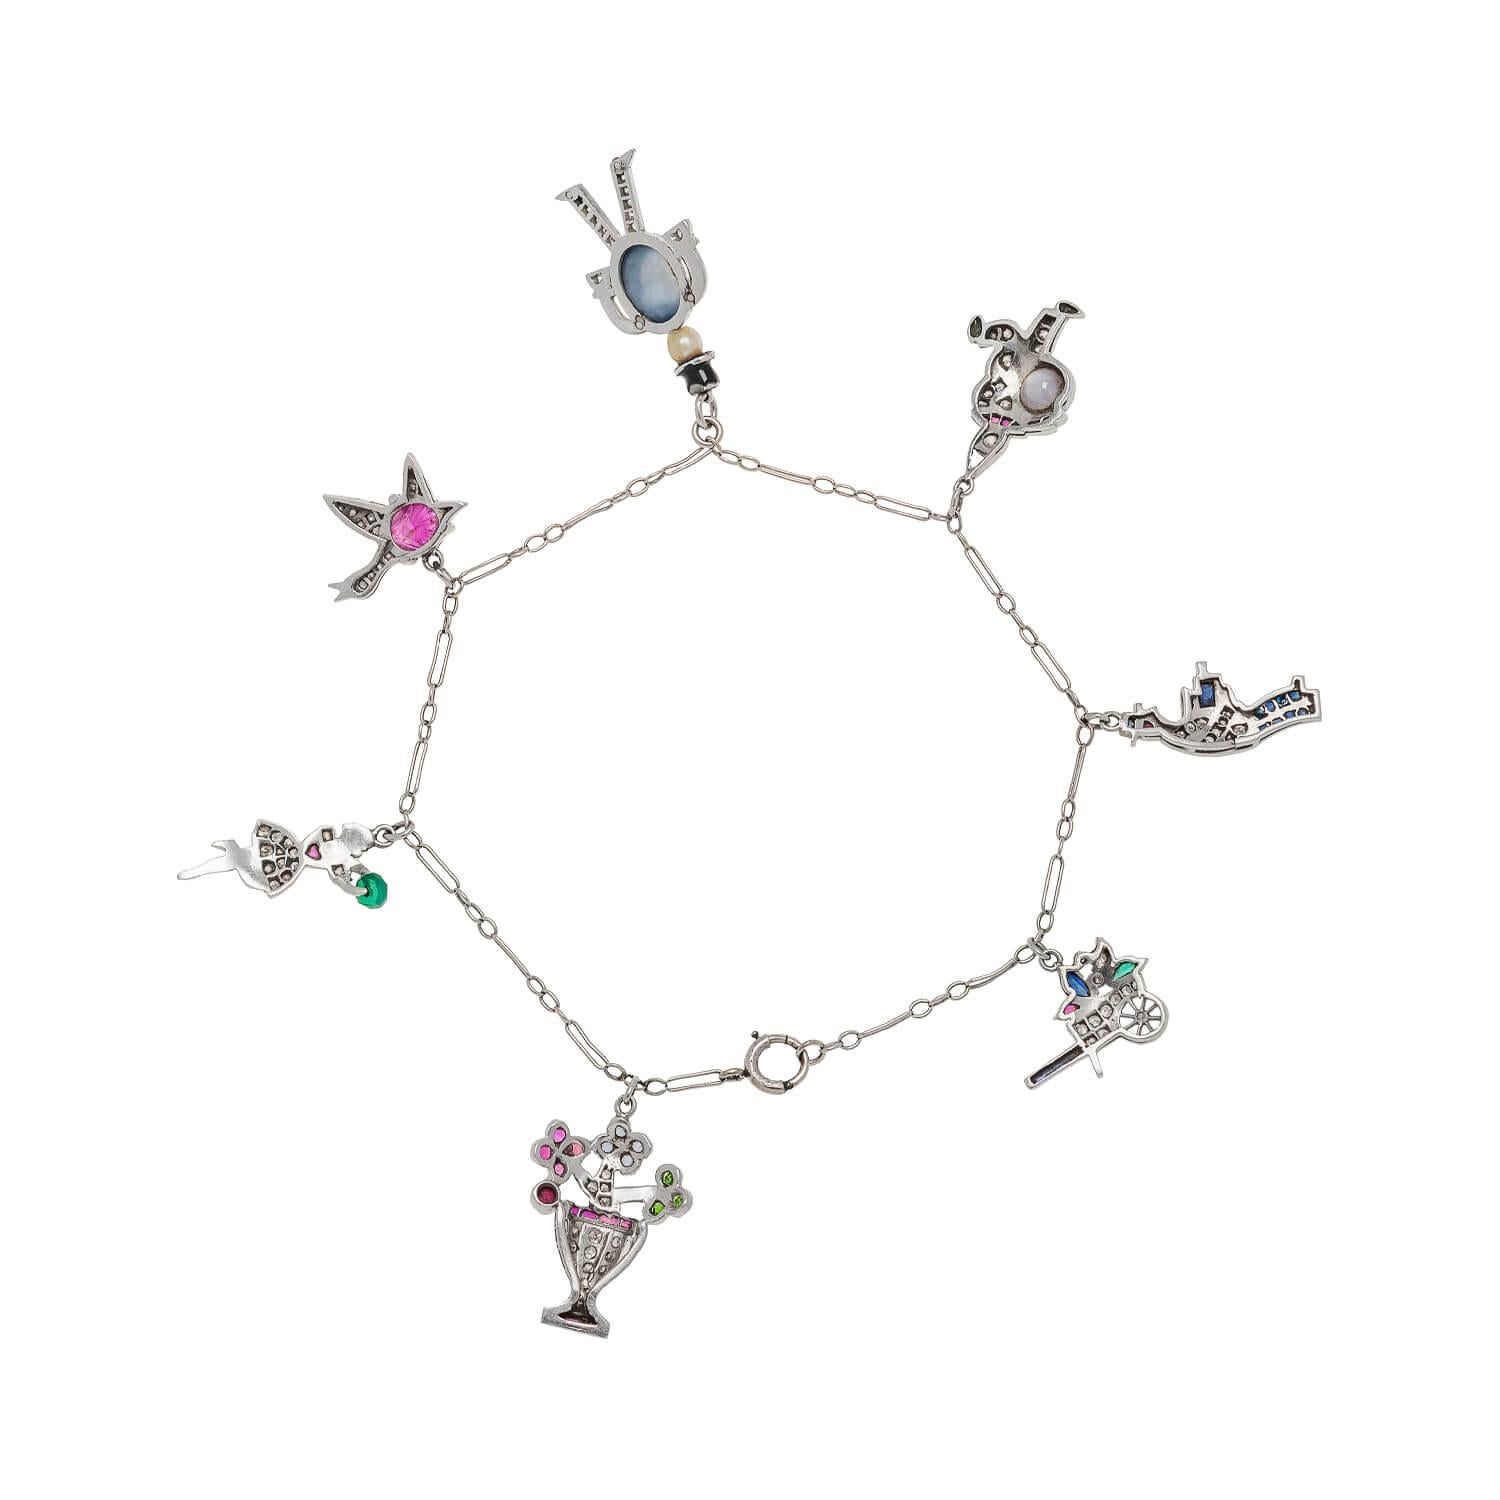 A beautiful charm bracelet from the Art Deco (ca1920) era! This lovely piece is a wonderful compilation of 7 charms that dangle from a fine platinum chain bracelet. Each platinum charm is unique and all are detailed with different sparkling